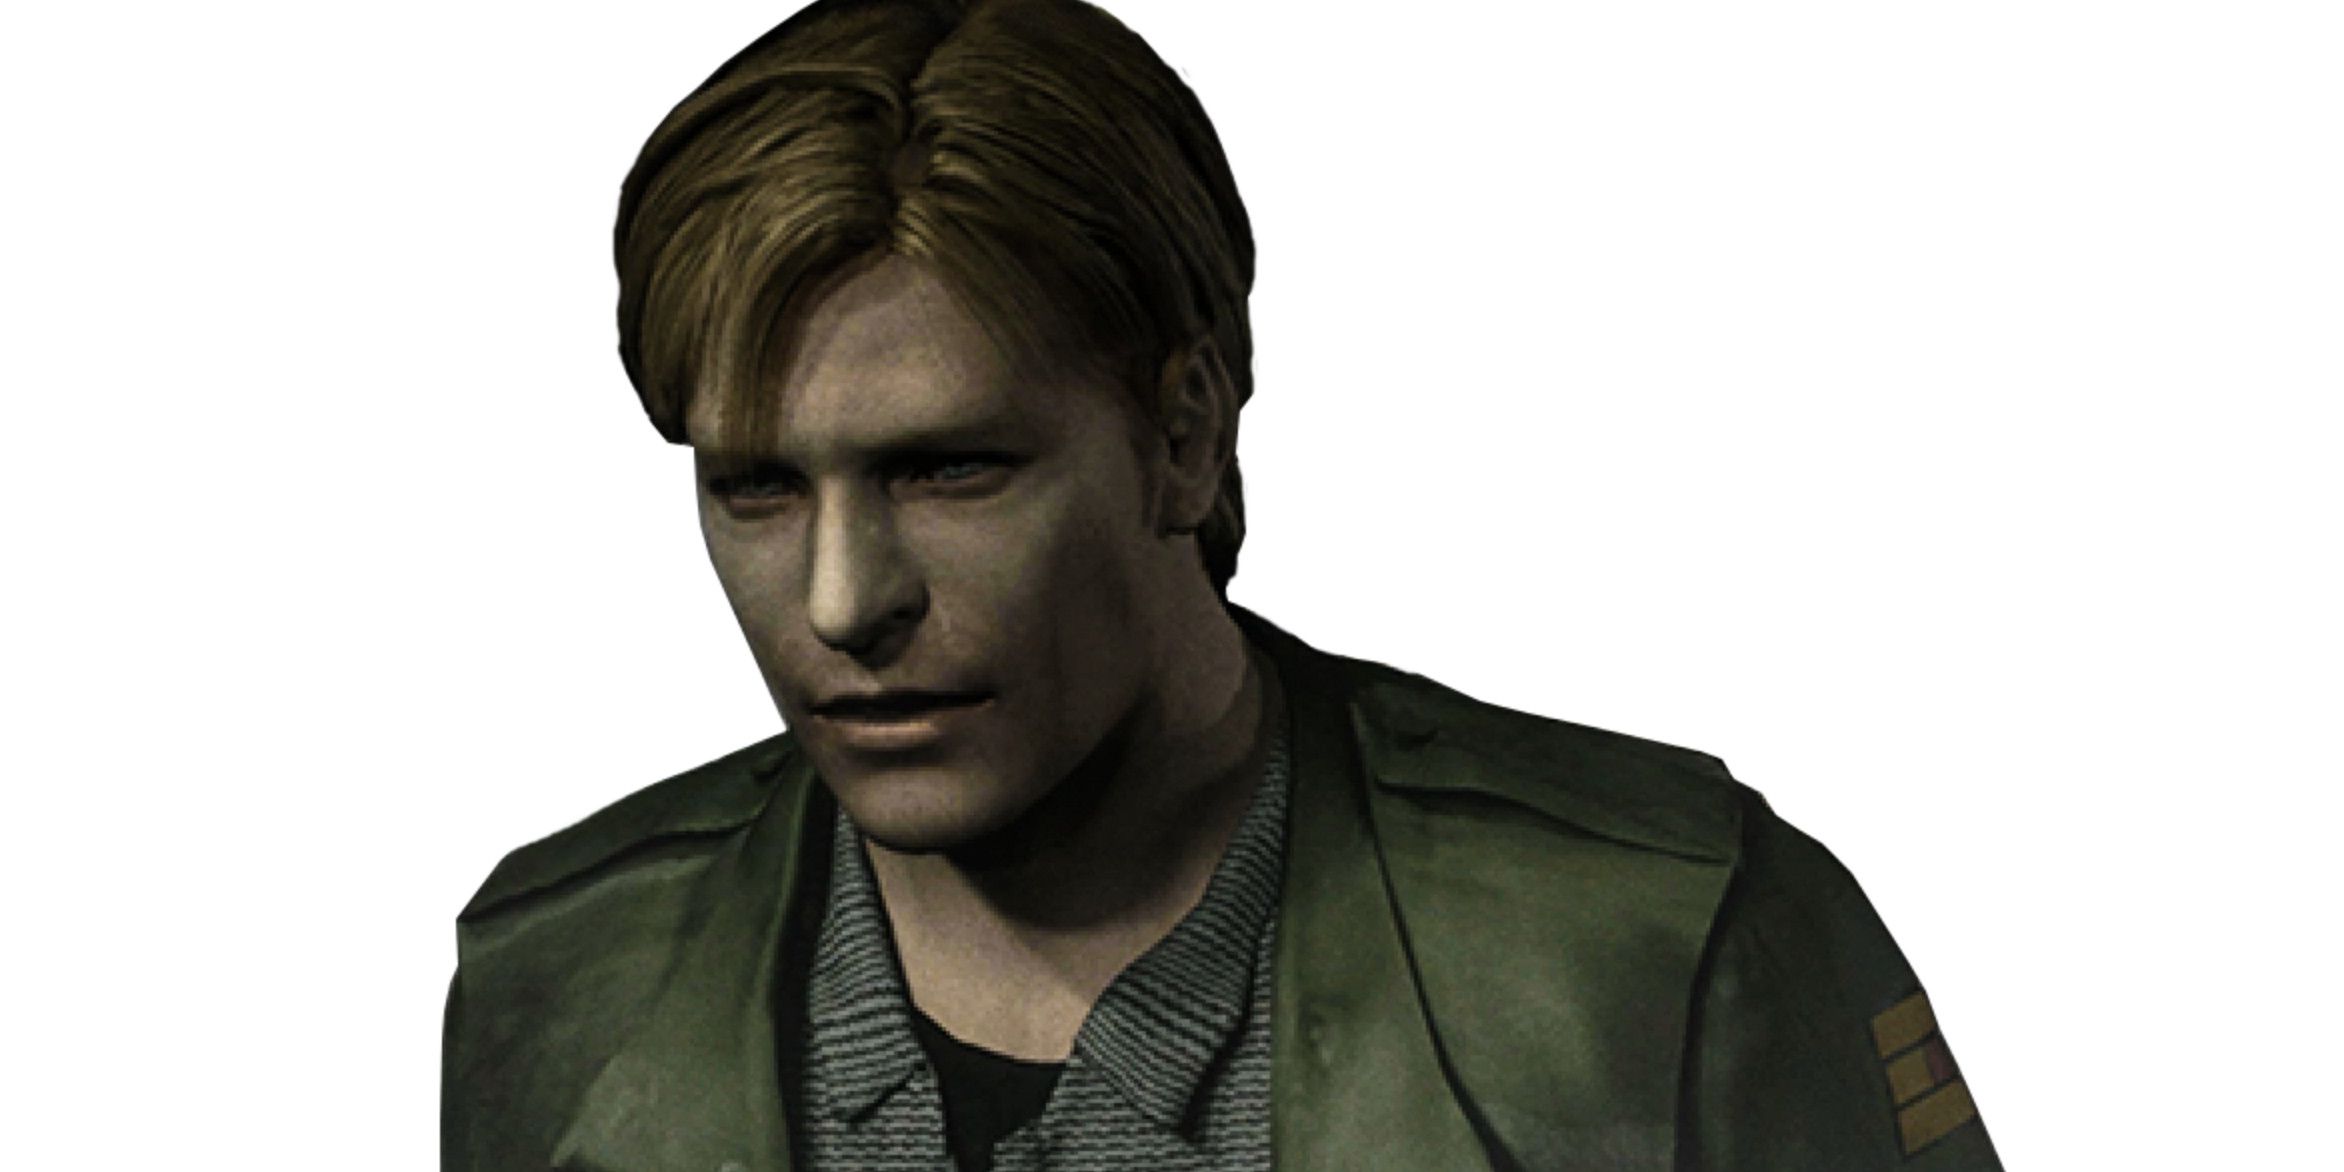 A headshot of James Sunderland the protagonist of Silent Hill 2